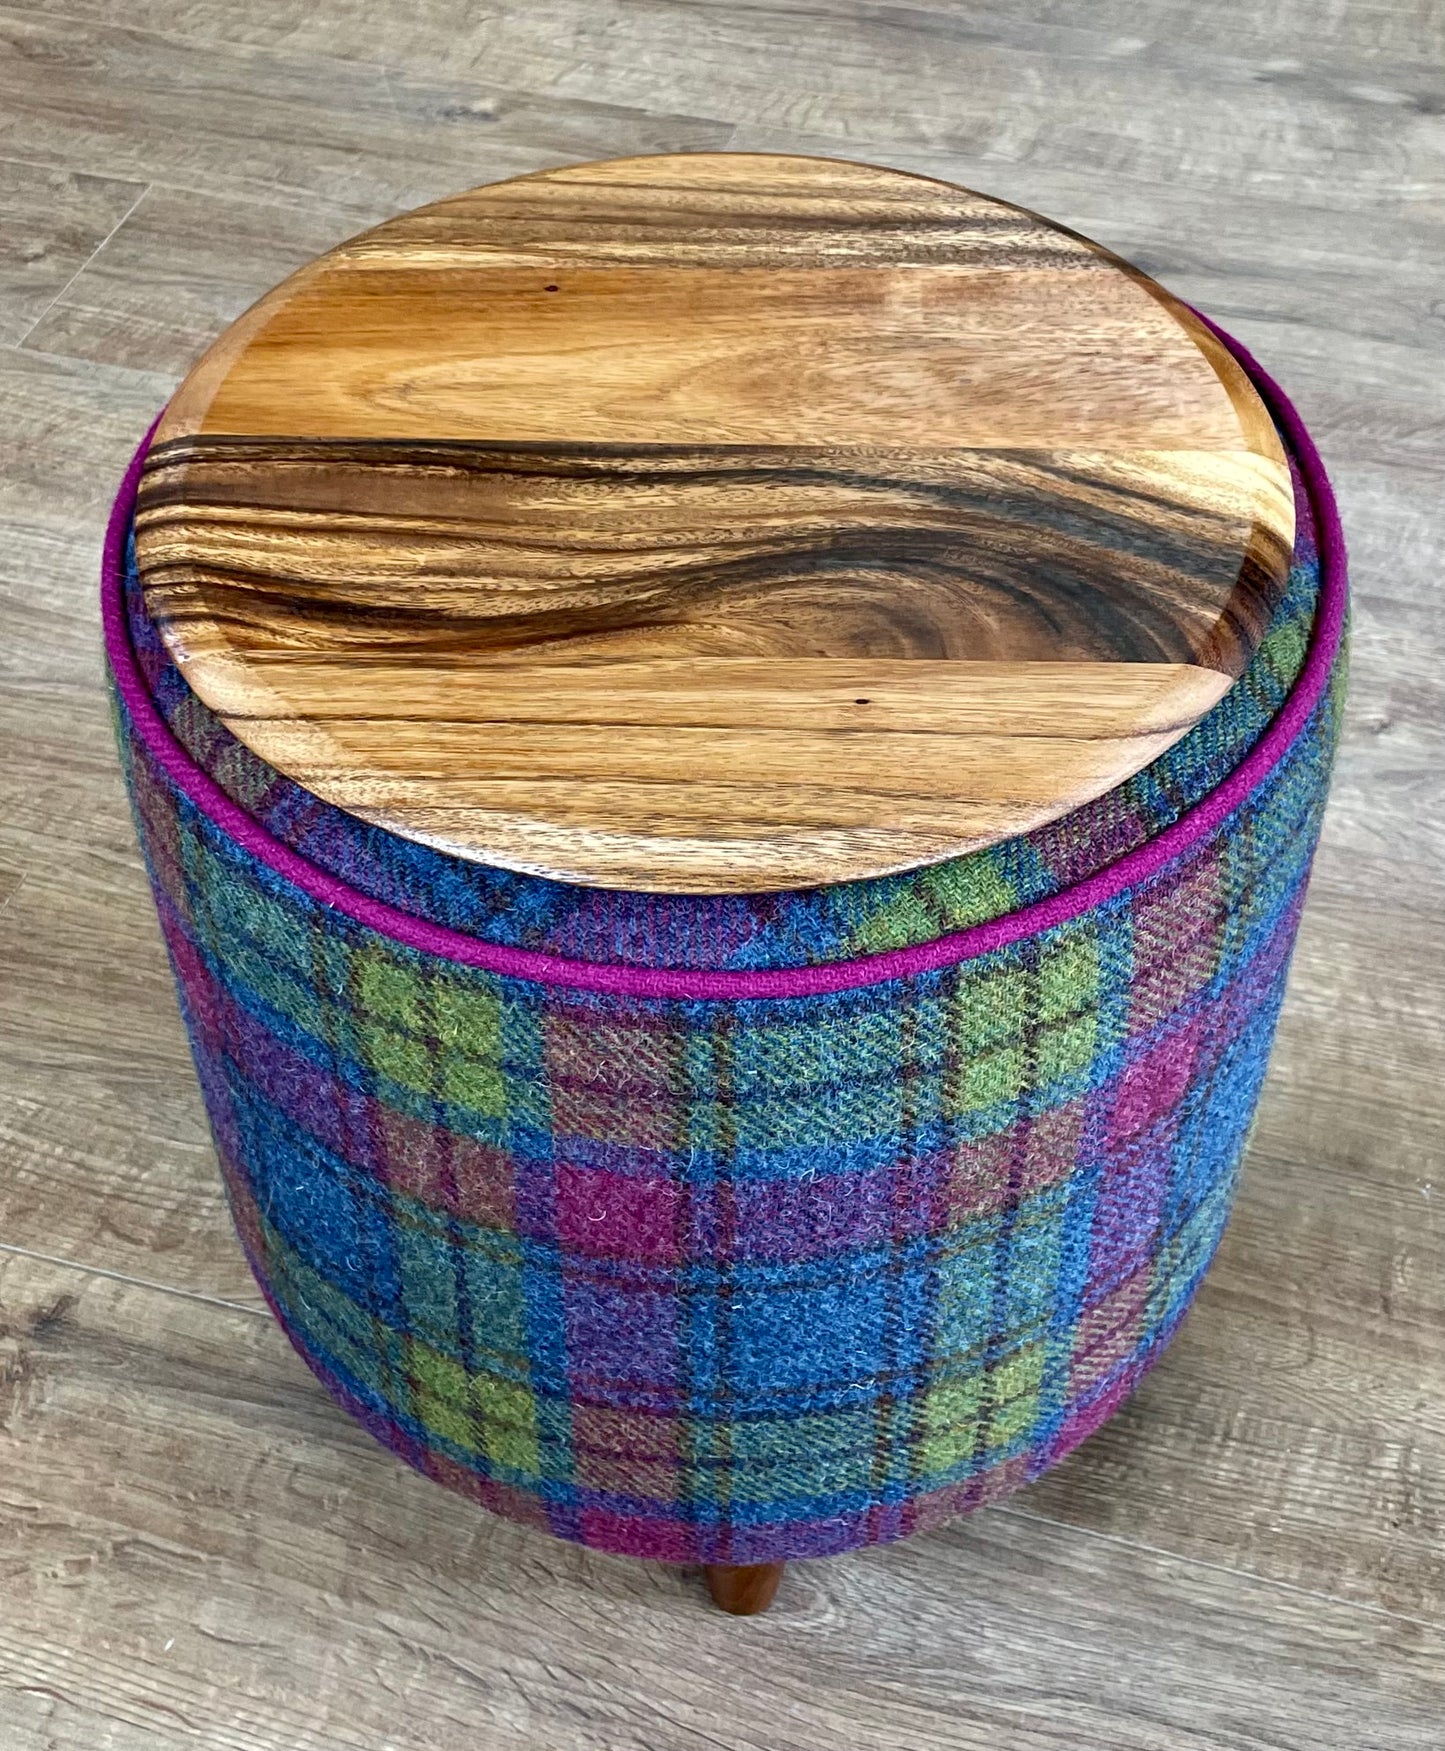 Colourful Tartan Harris Tweed Chunky End Table with Fuchsia Piping and Removable Wooden Top